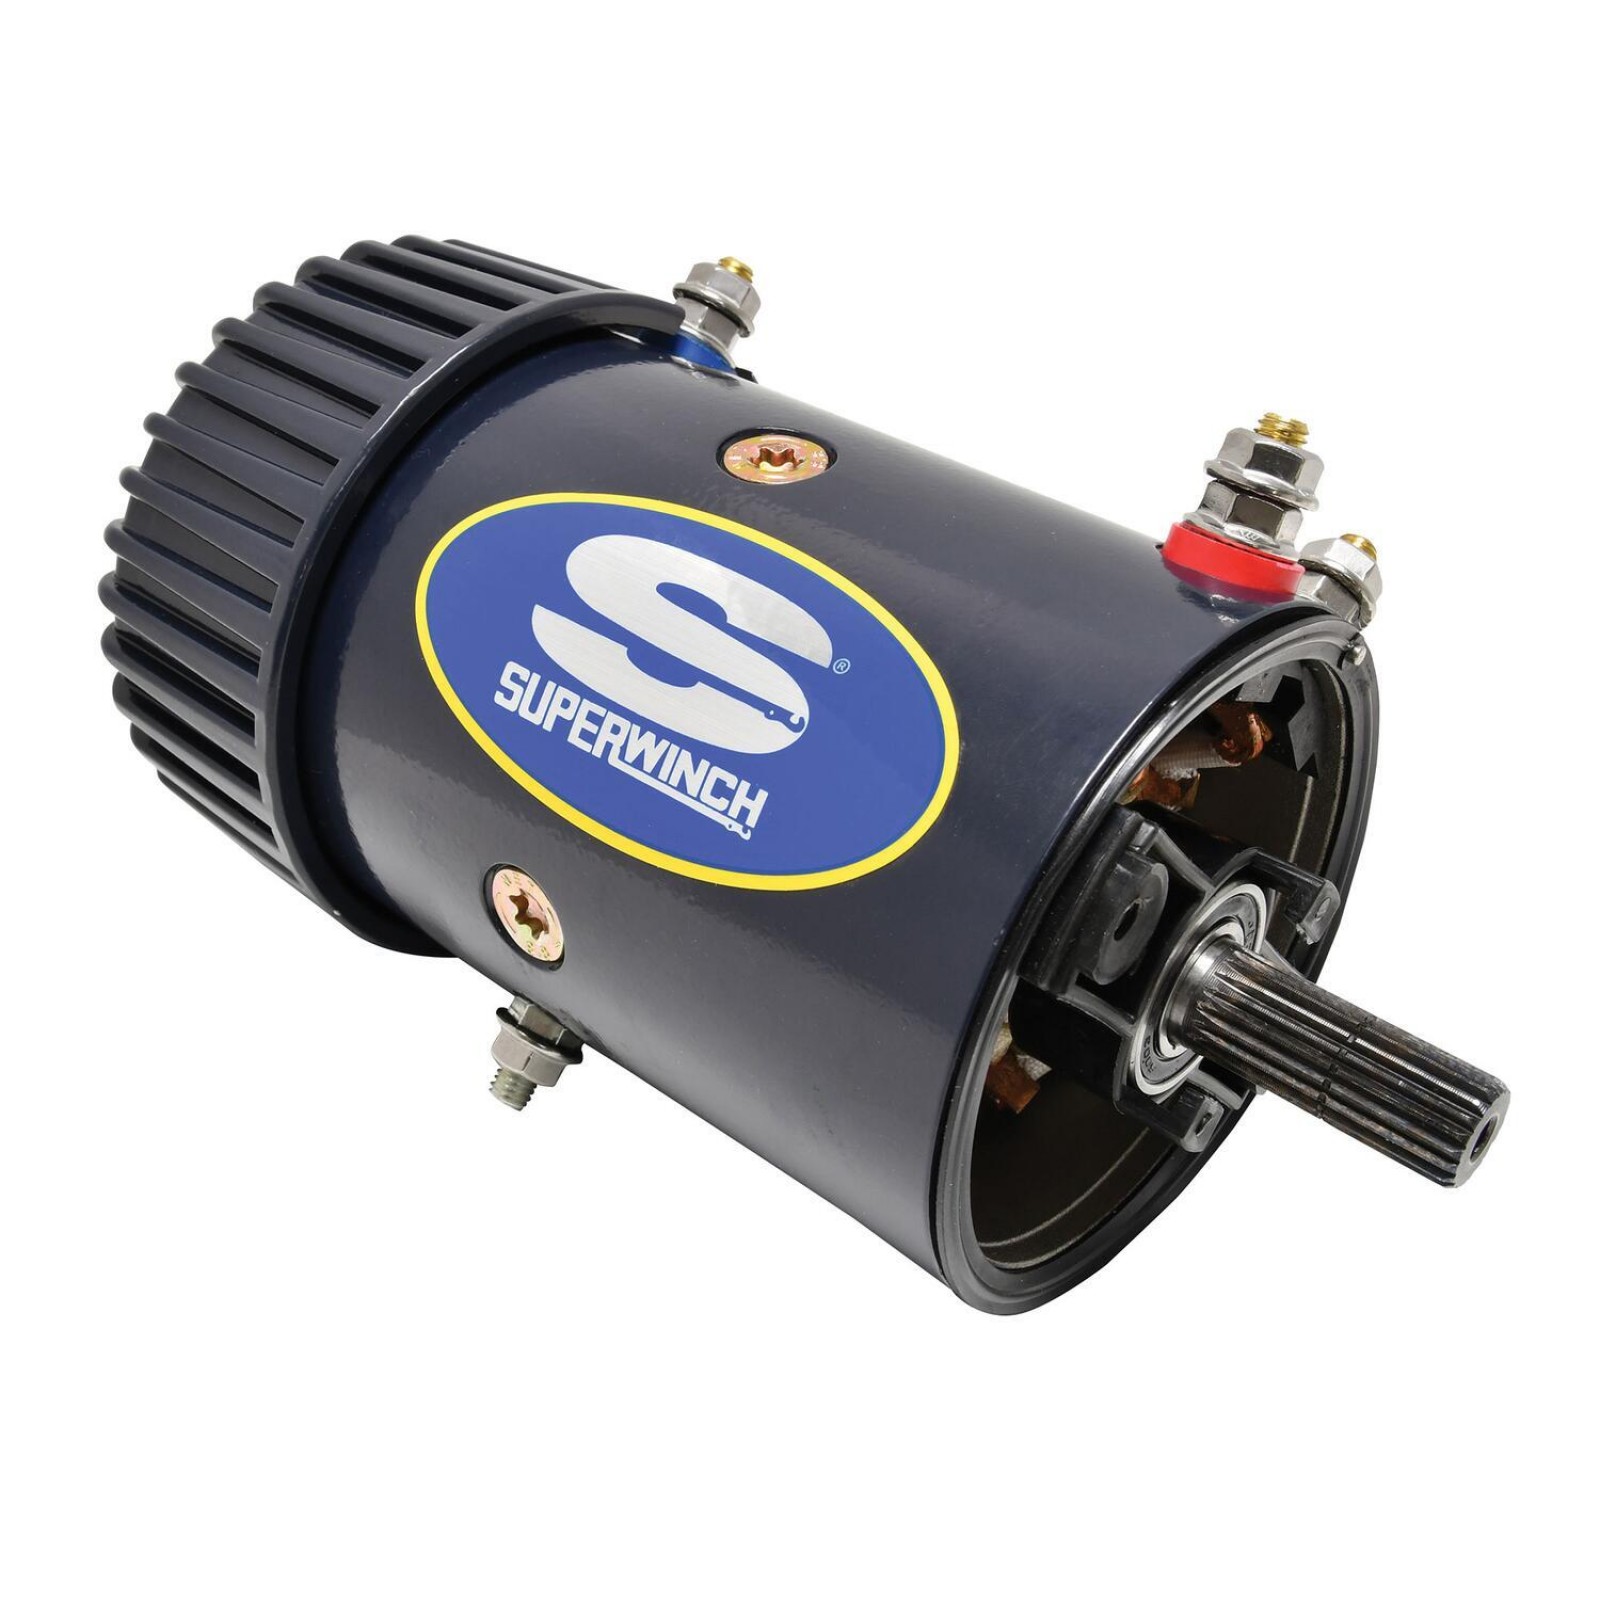 Replacement Motor for Talon 9.5/14.0 Winches